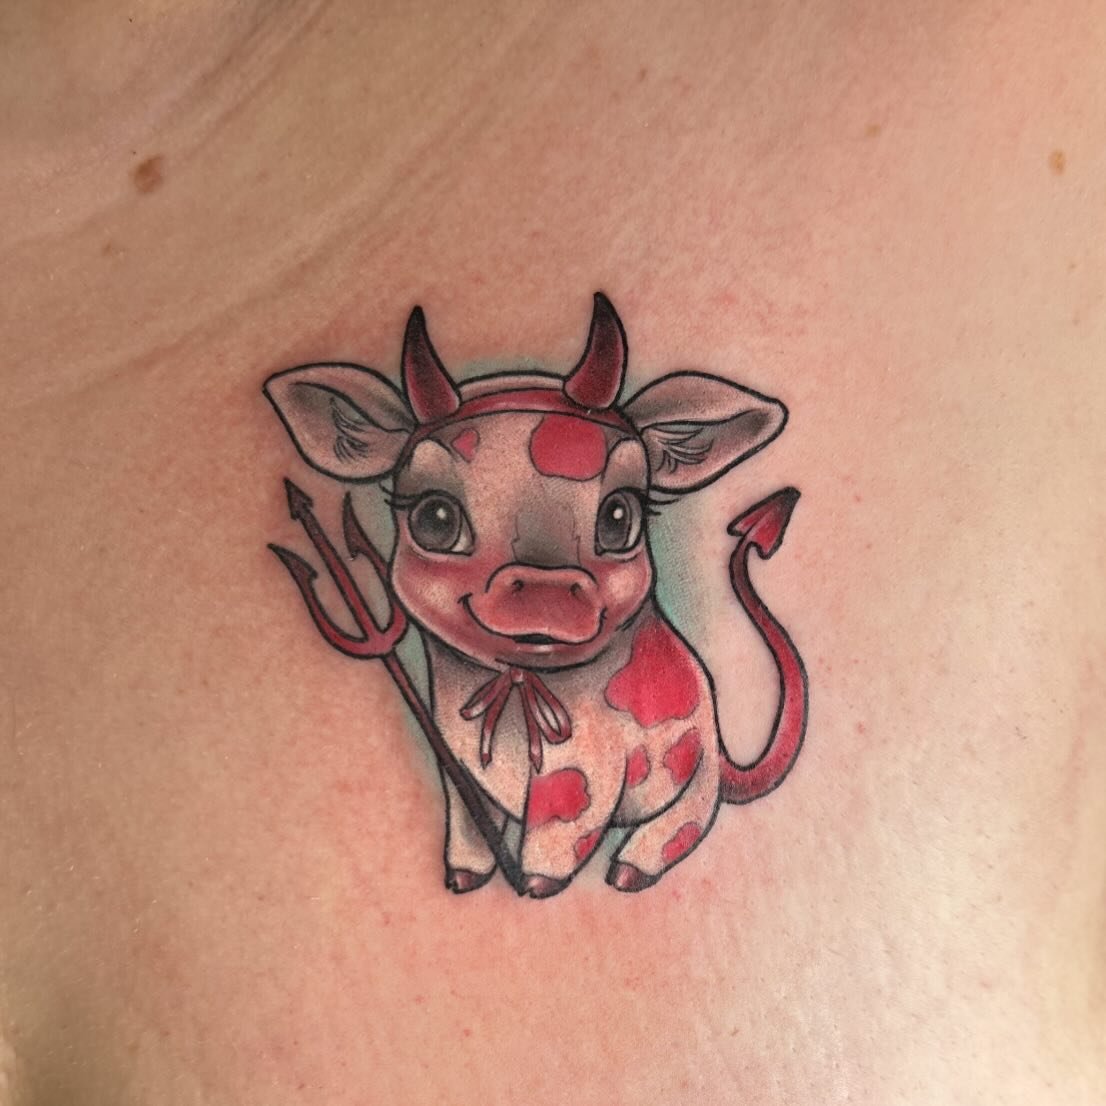 As always I&rsquo;m so behind on posting in spite of my intentions lol. Anyway here&rsquo;s a lil strawberry milk cow dressed up like a devil. 
I&rsquo;ve got a couple spots left in May, and June, and plenty in July. You can use the link to book, or 